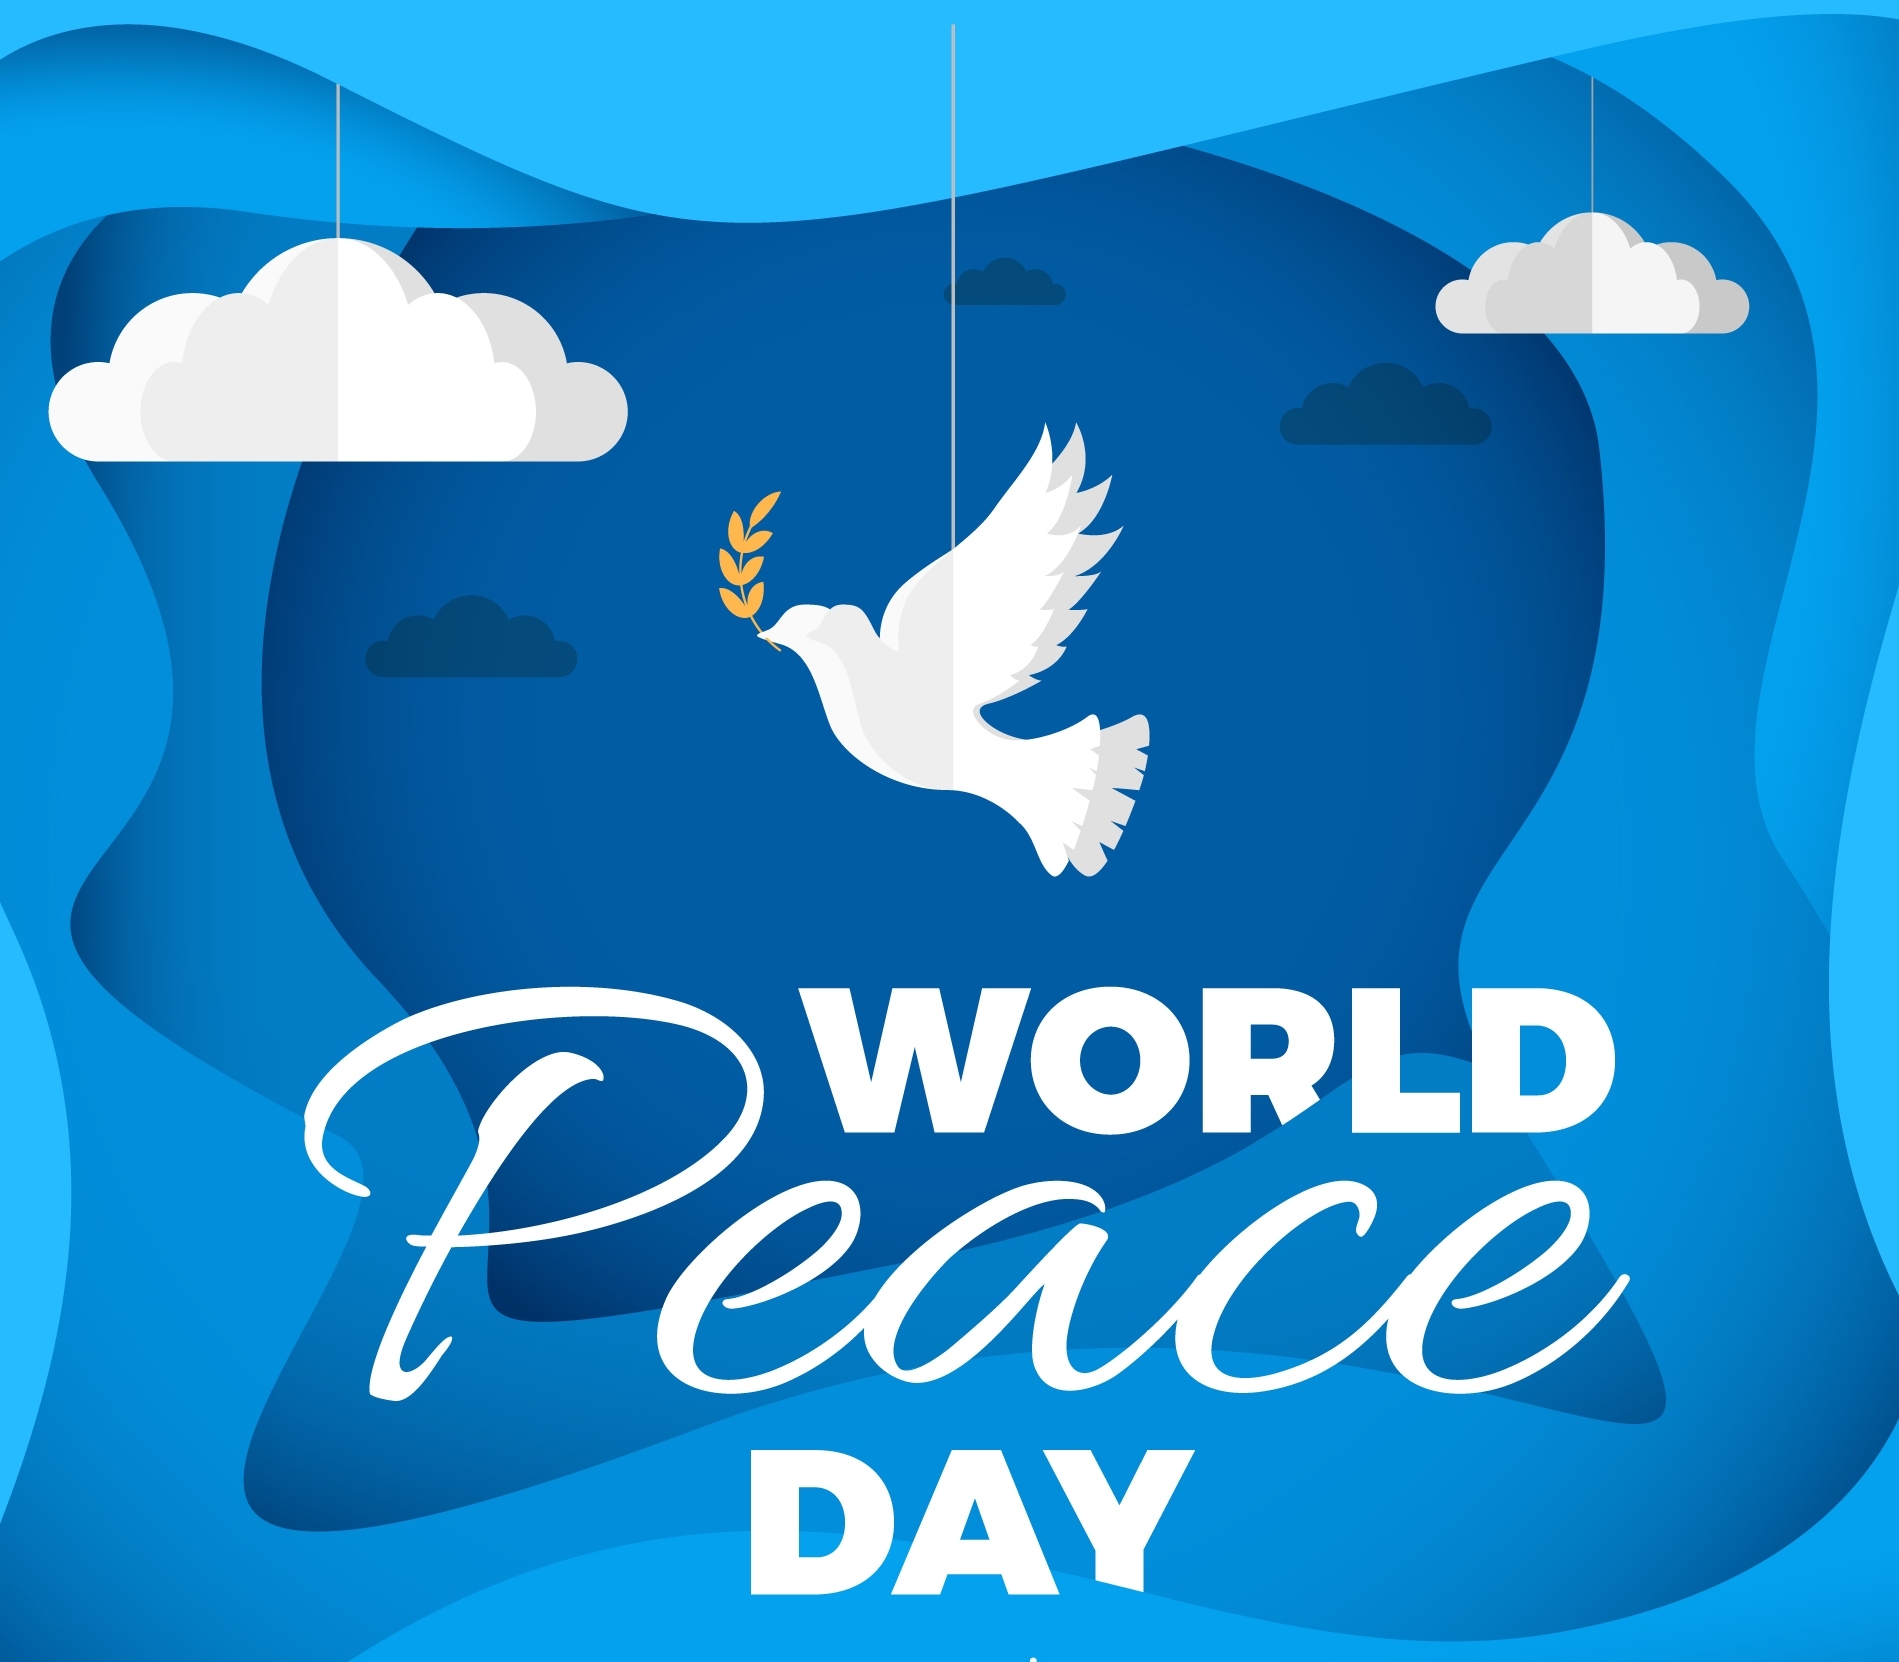 World Peace and Understanding Day 